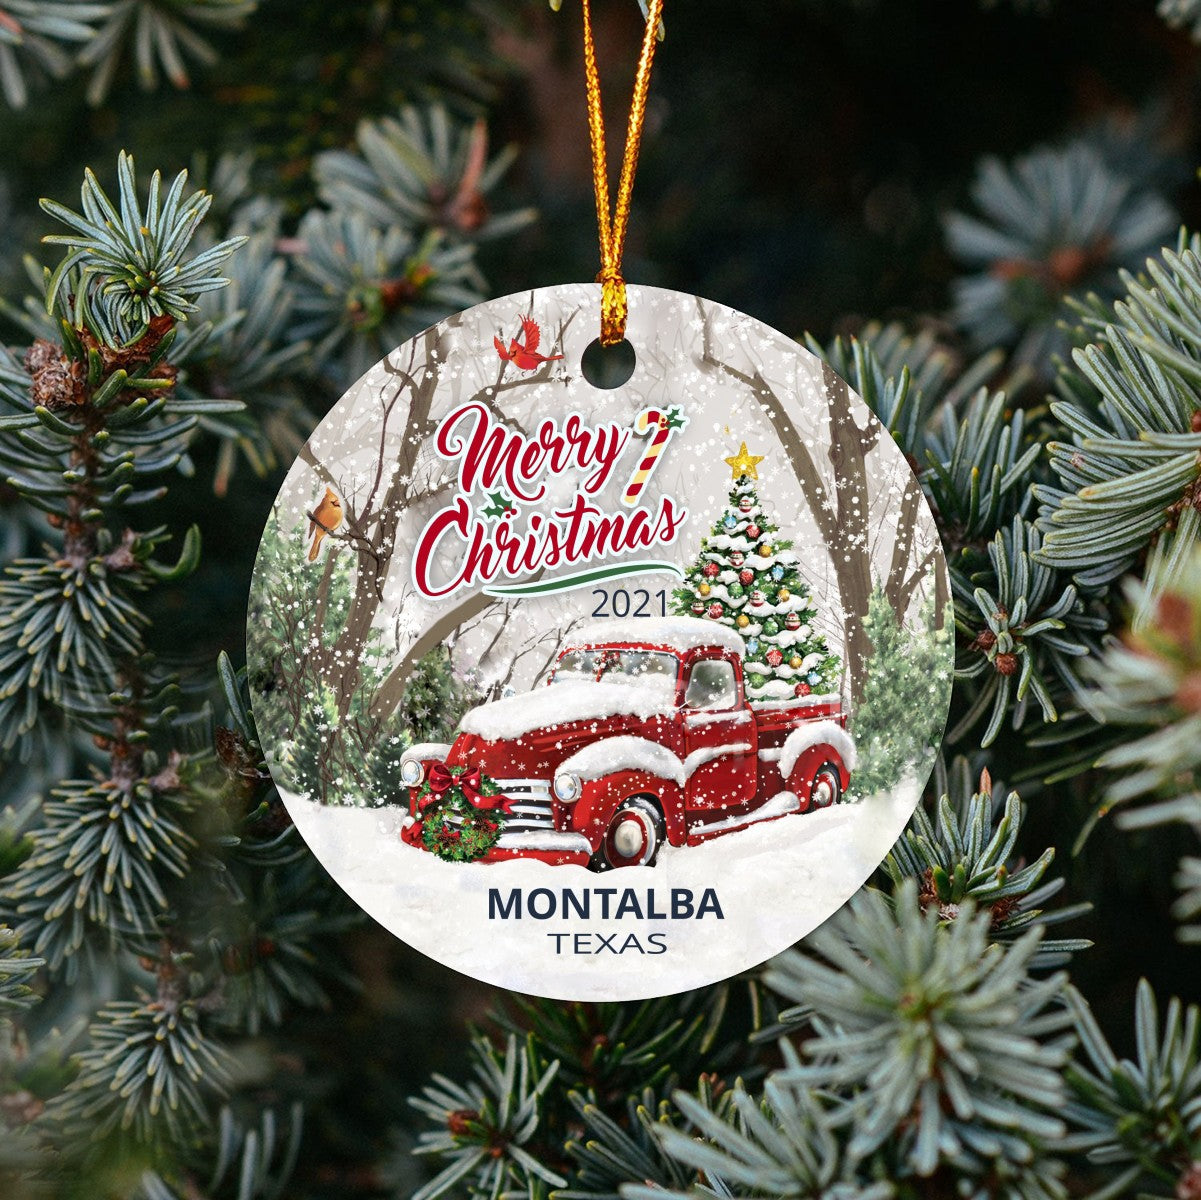 Christmas Tree Ornaments Montalba - Ornament With Name City, State Montalba Texas TX Ornament - Red Truck Xmas Ornaments 3'' Plastic Gift For Family, Friend And Housewarming